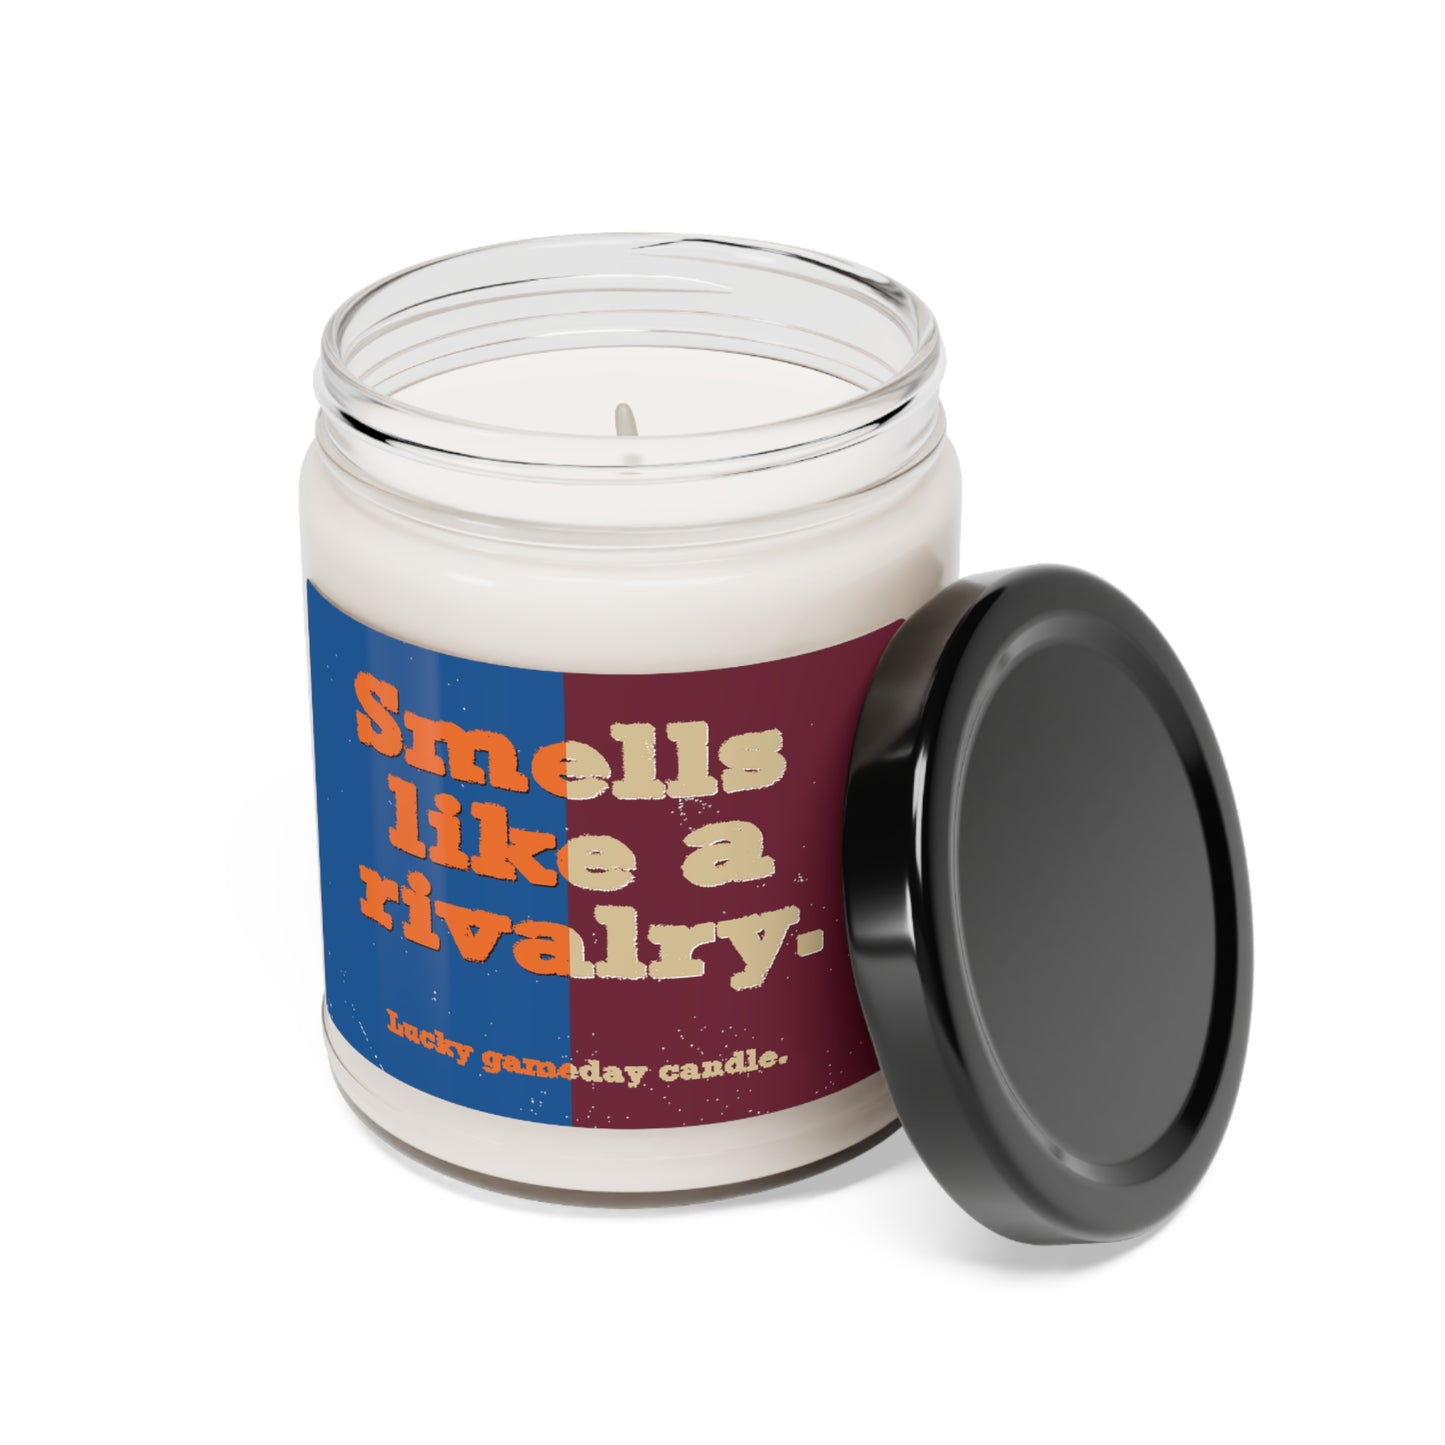 Florida vs. Florida State - "Smells Like a Rivalry" Scented Candle